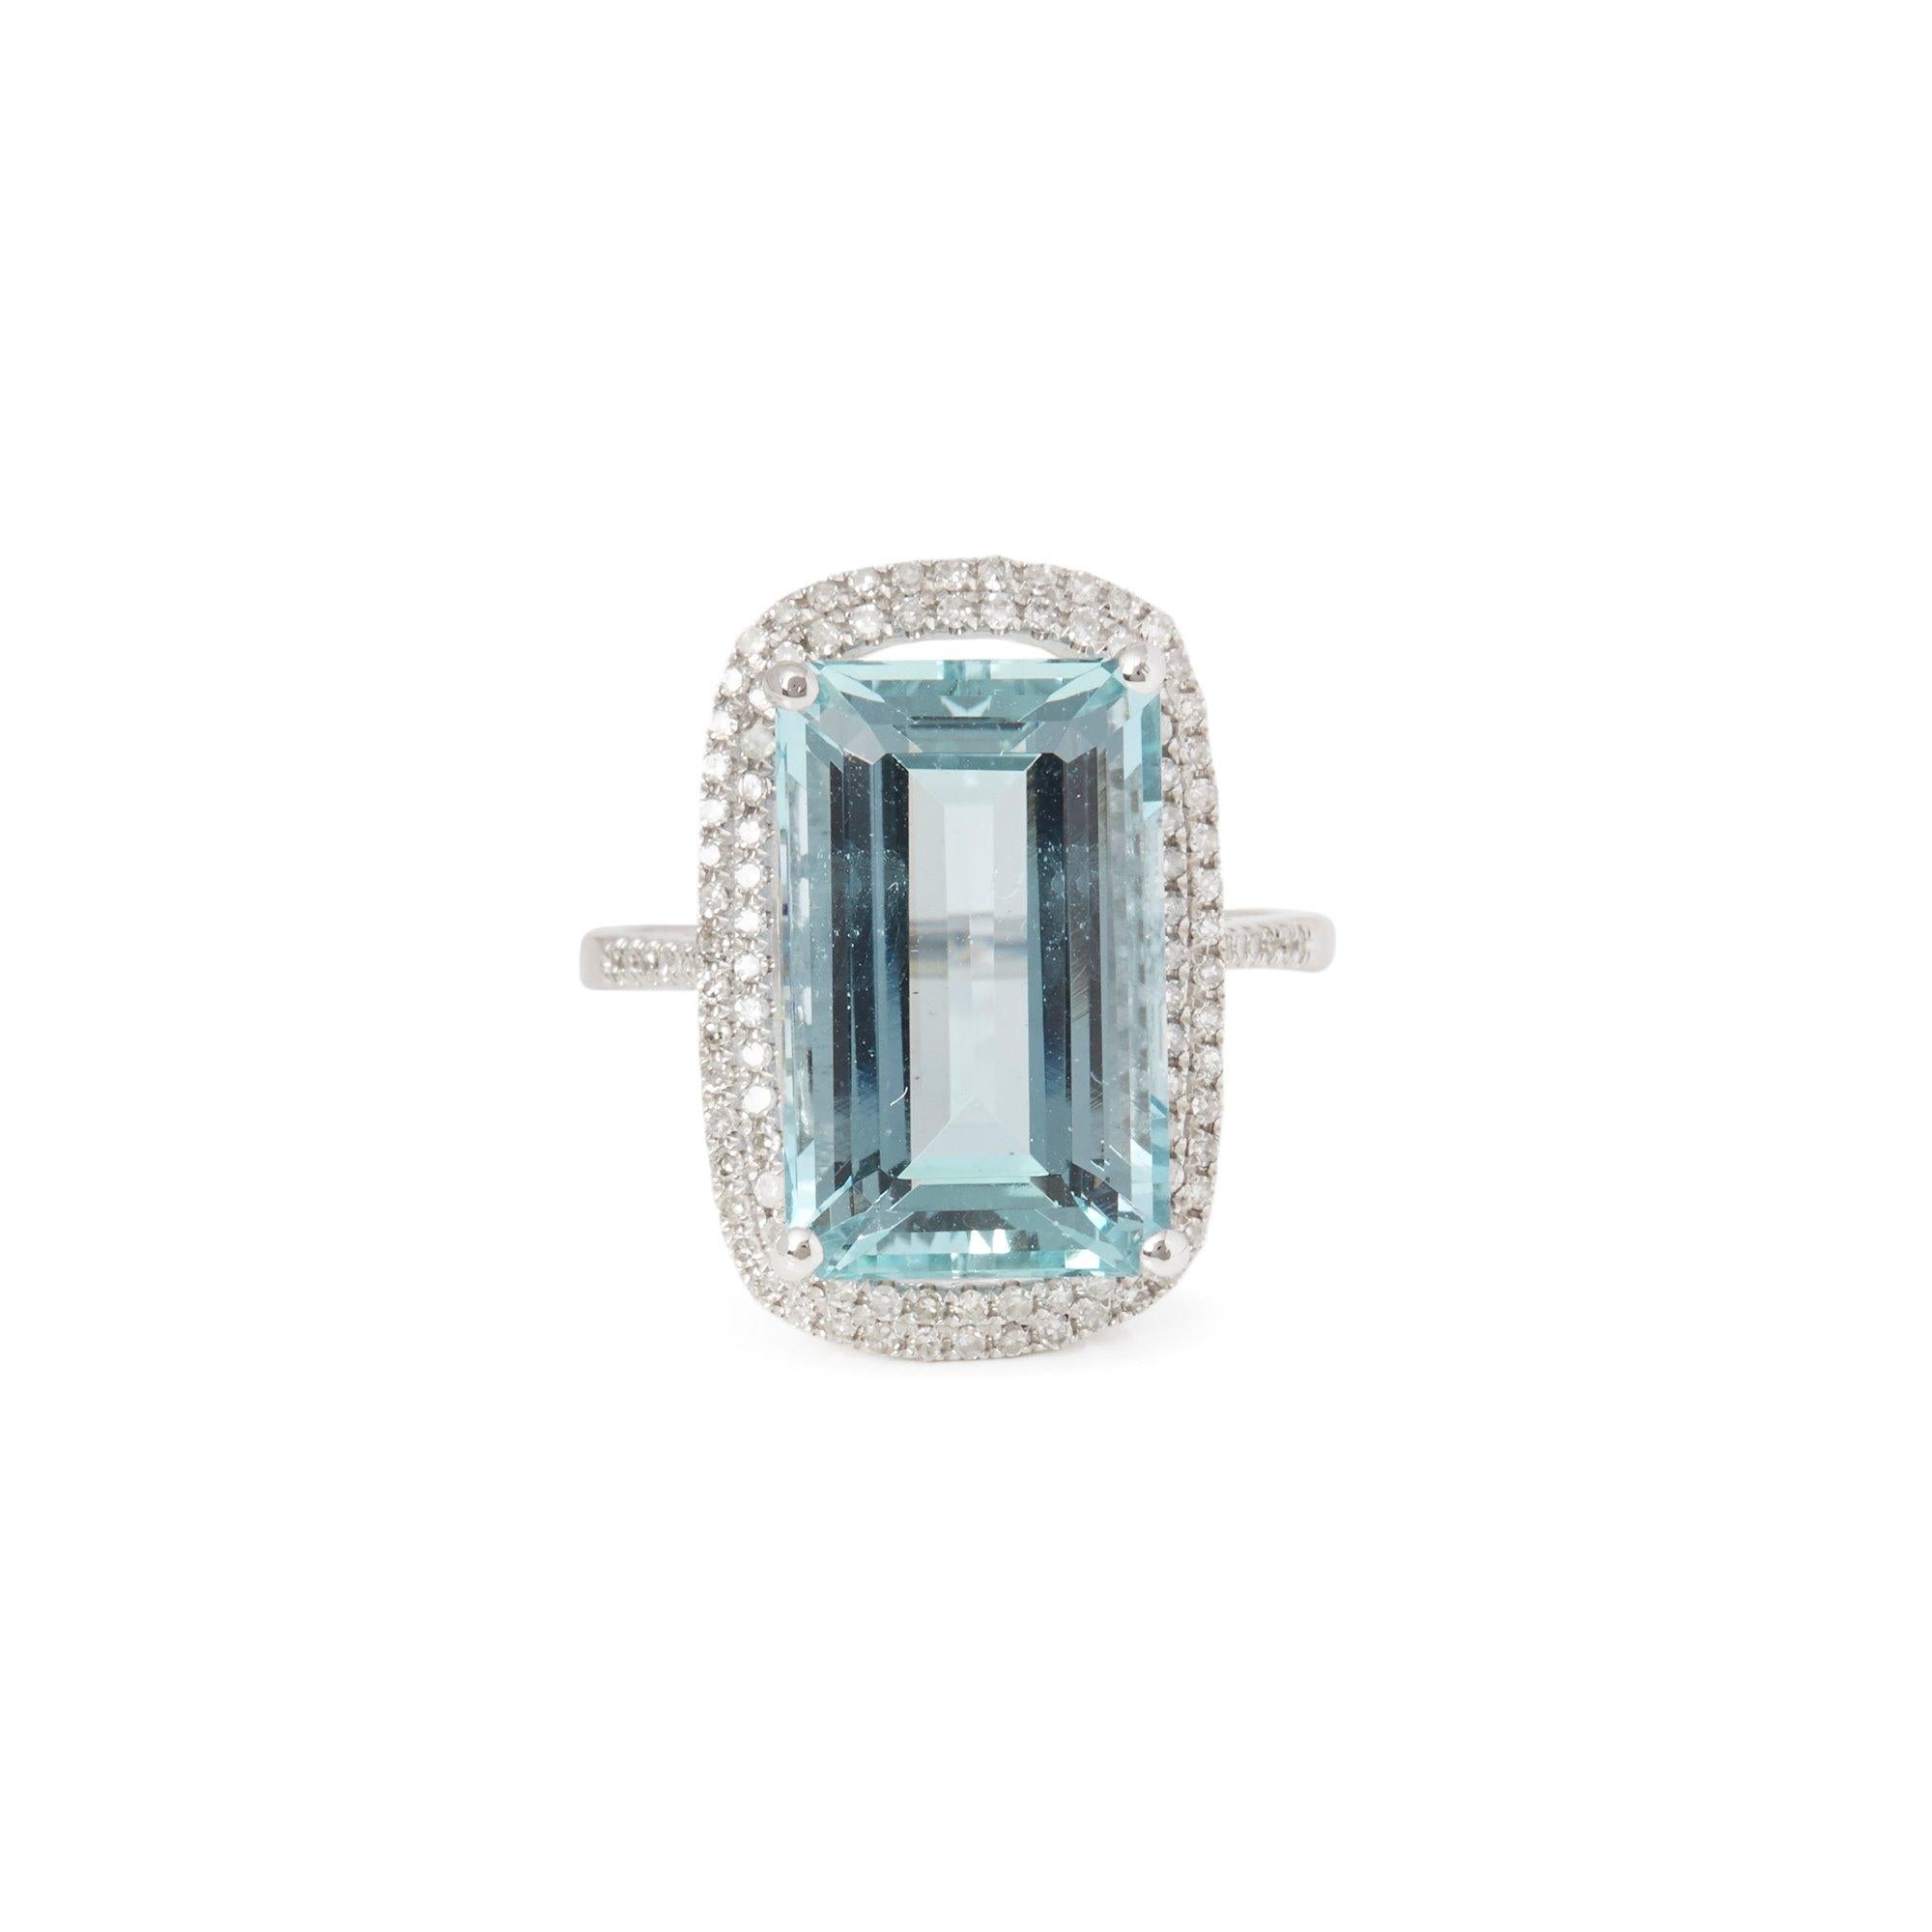 This ring designed by David Jerome is from his private collection and features one Emerald cut Aquamarine totalling 8.71cts sourced in Brazil. Set with round brilliant cut Diamonds totalling 0.41cts mounted in an 18k white gold setting. UK finger